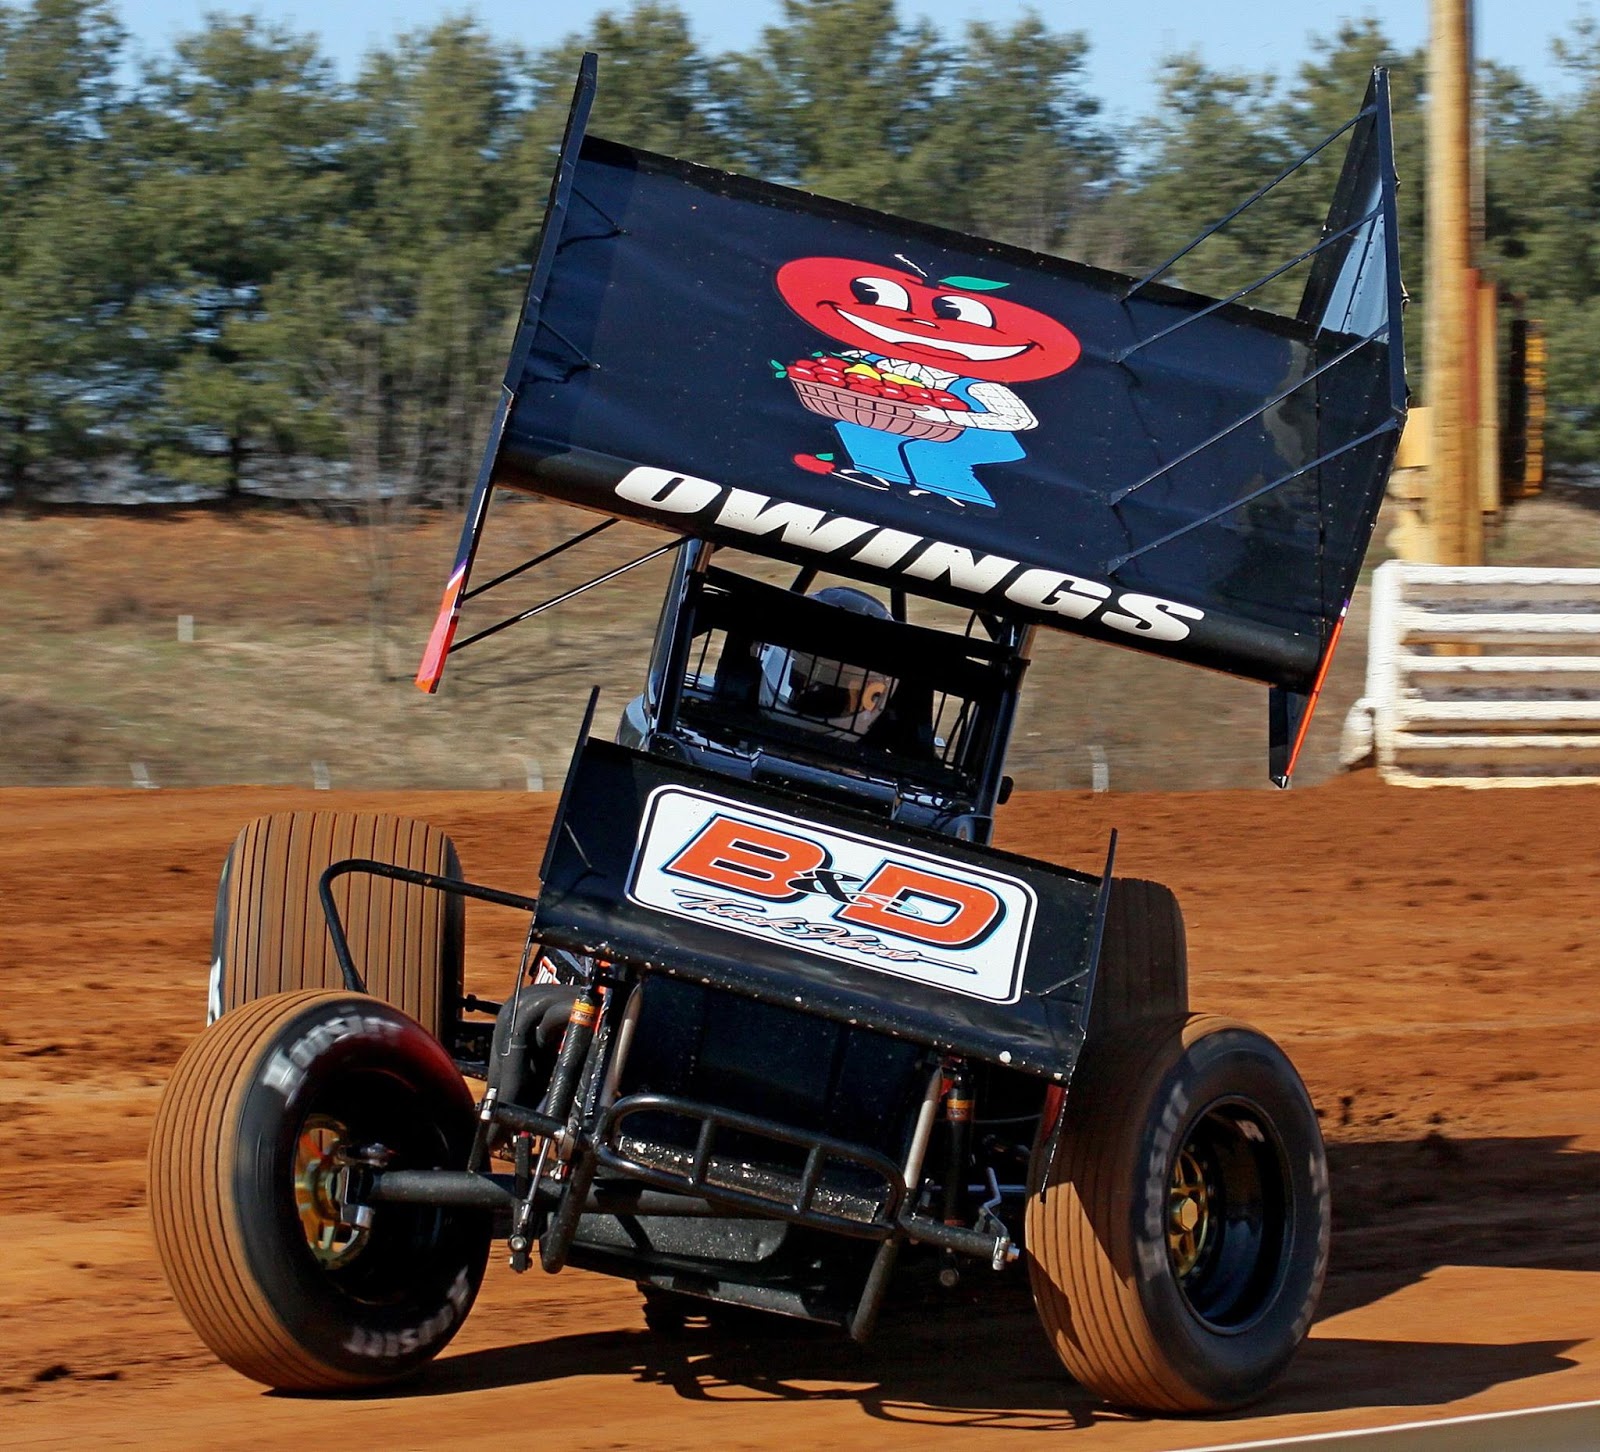 CENTRAL PA RACING SCENE Lincoln Speedway Ice Breaker 30 photos